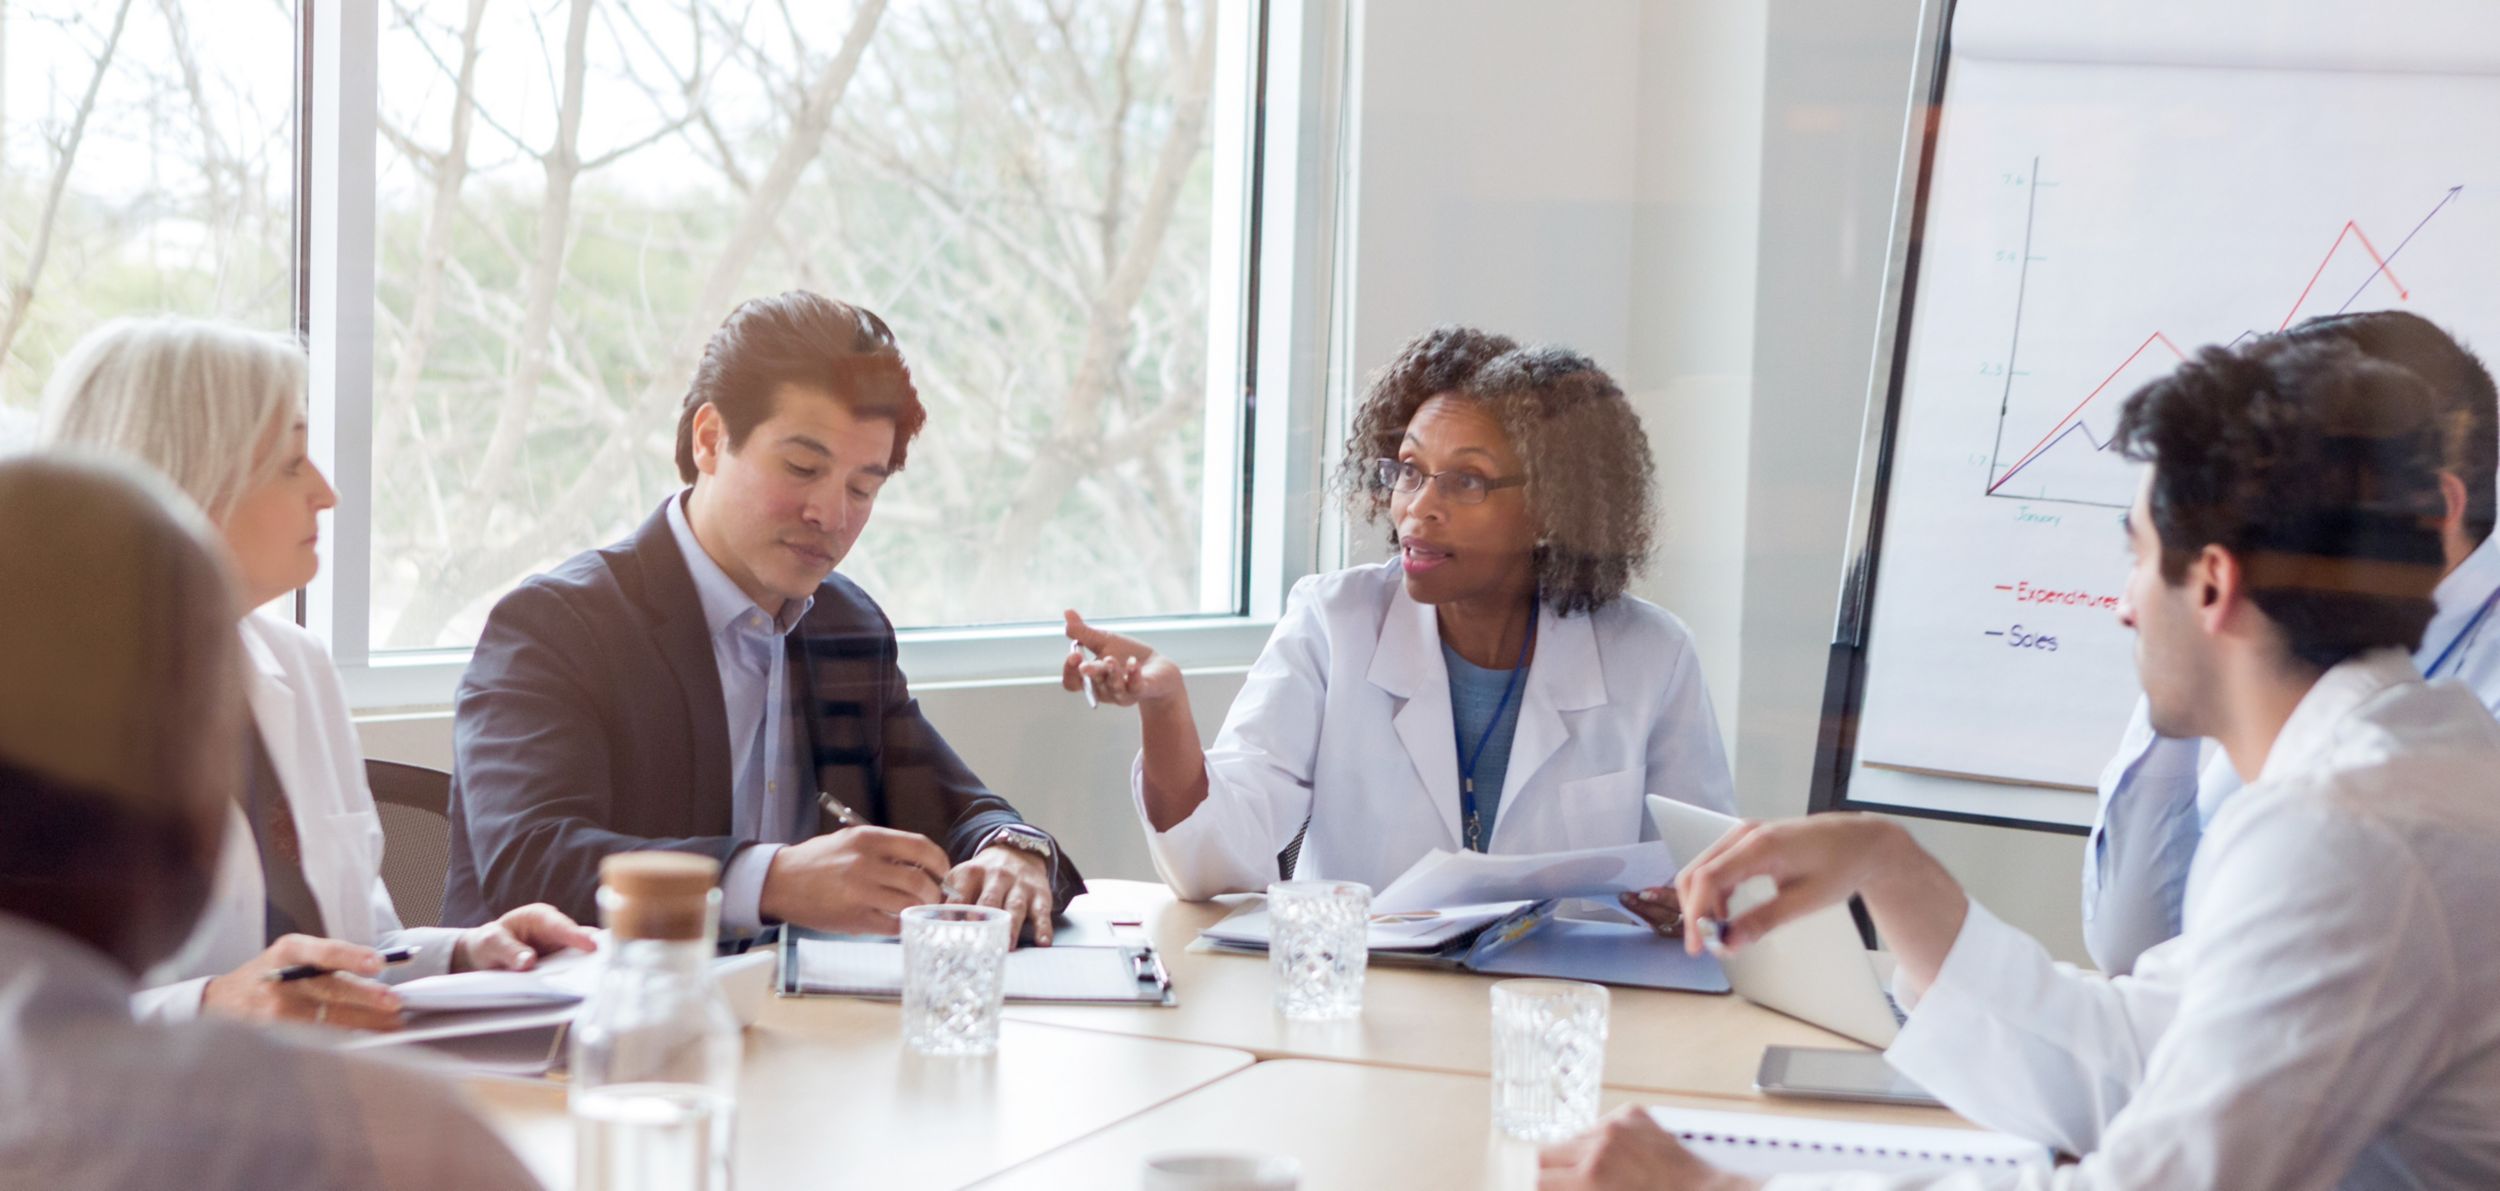 Mature female doctor gestures while discussing something during a healthcare conference with colleagues.